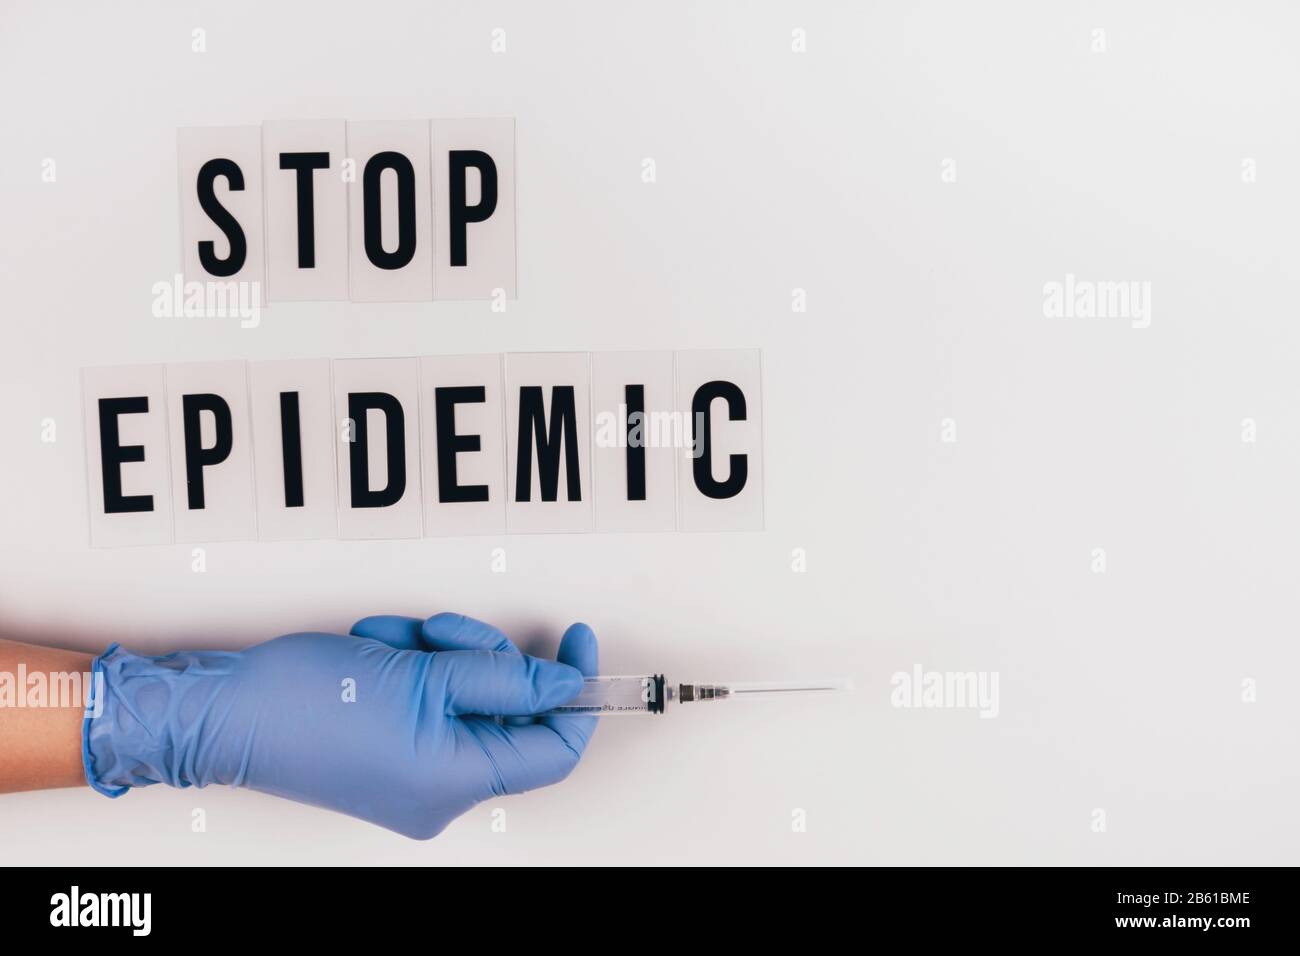 The words STOP EPIDEMIC on a gray background and a gloved hand with a syringe. Stock Photo